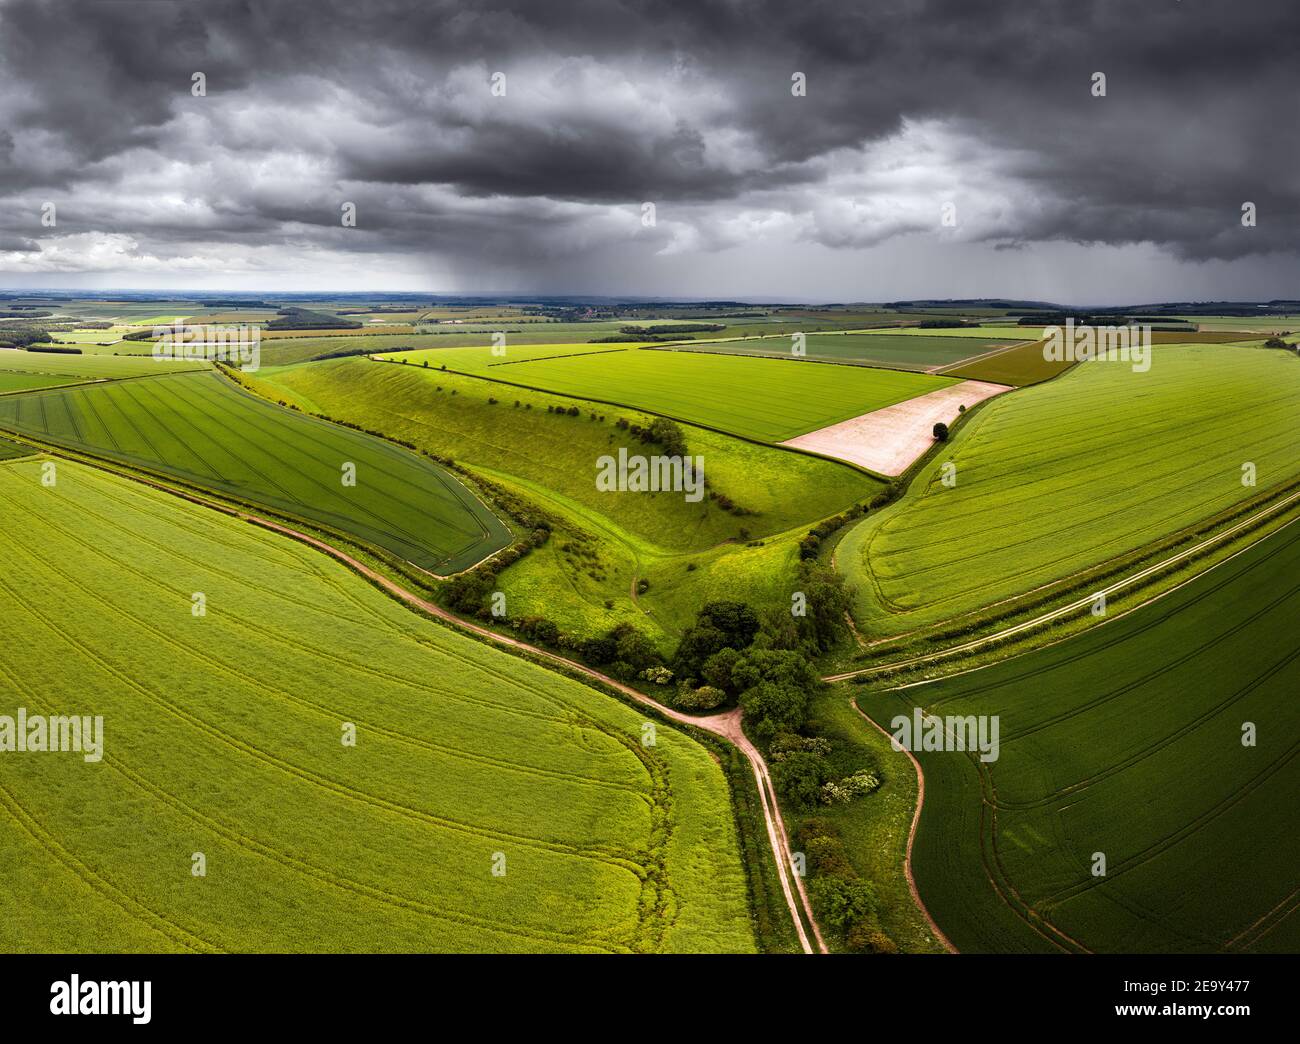 Aerial photo of lush green fields and dry chalk valley, Holm Dale, in Yorkshire Wolds with storm approaching Stock Photo